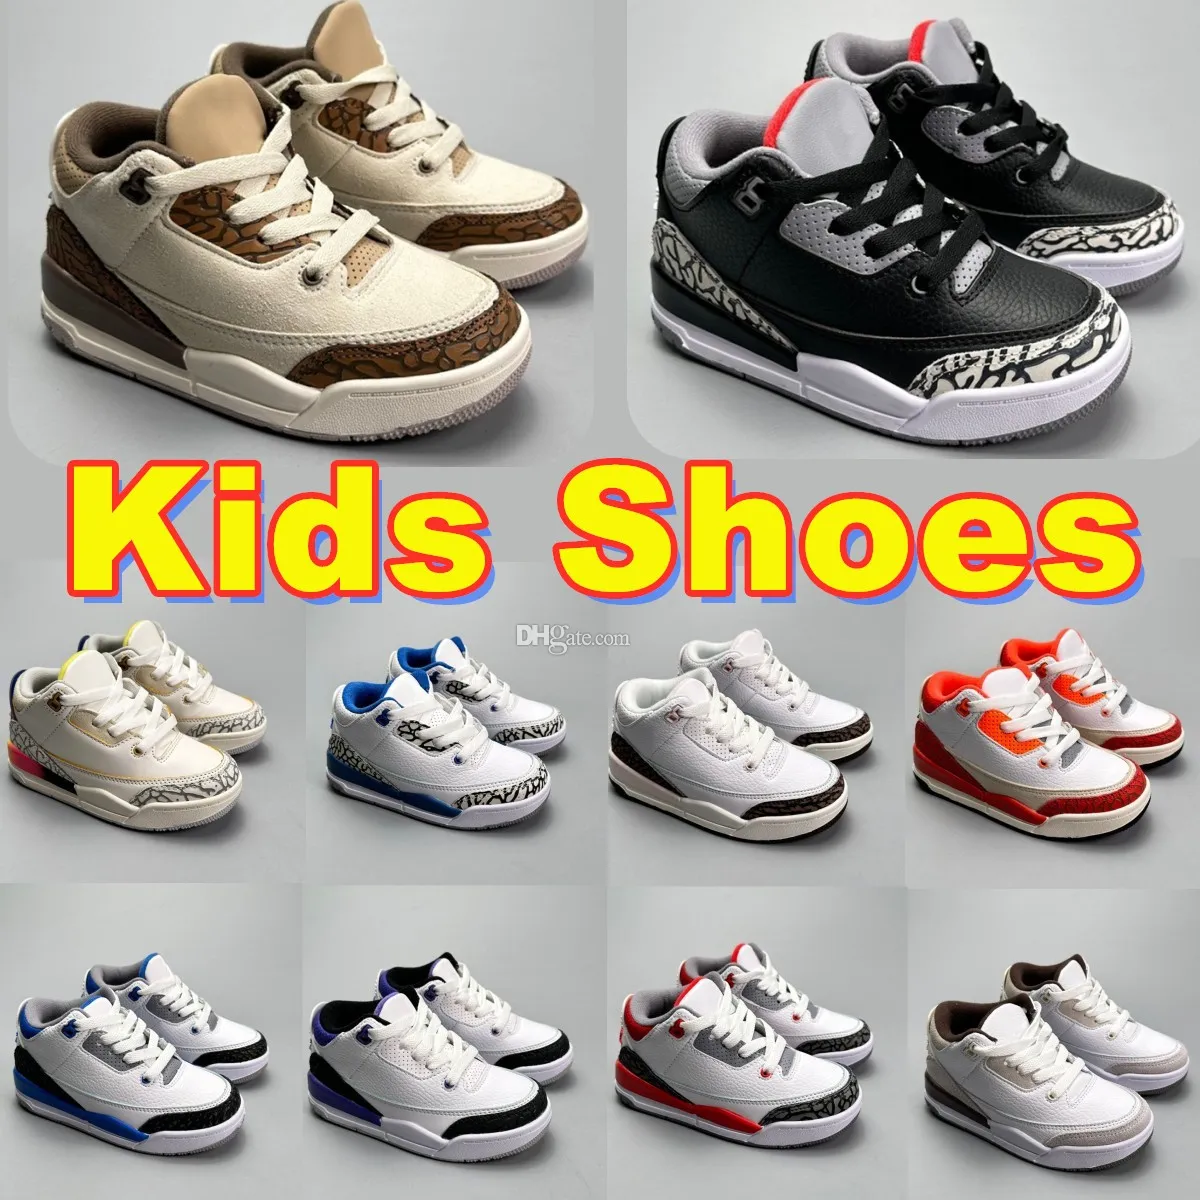 Toddlers sneakers Kids Jumpman 3s 3 Shoes Girls Boys Basketball Game Designer kid shoe toddler sneaker Athletic Infants sports trainers